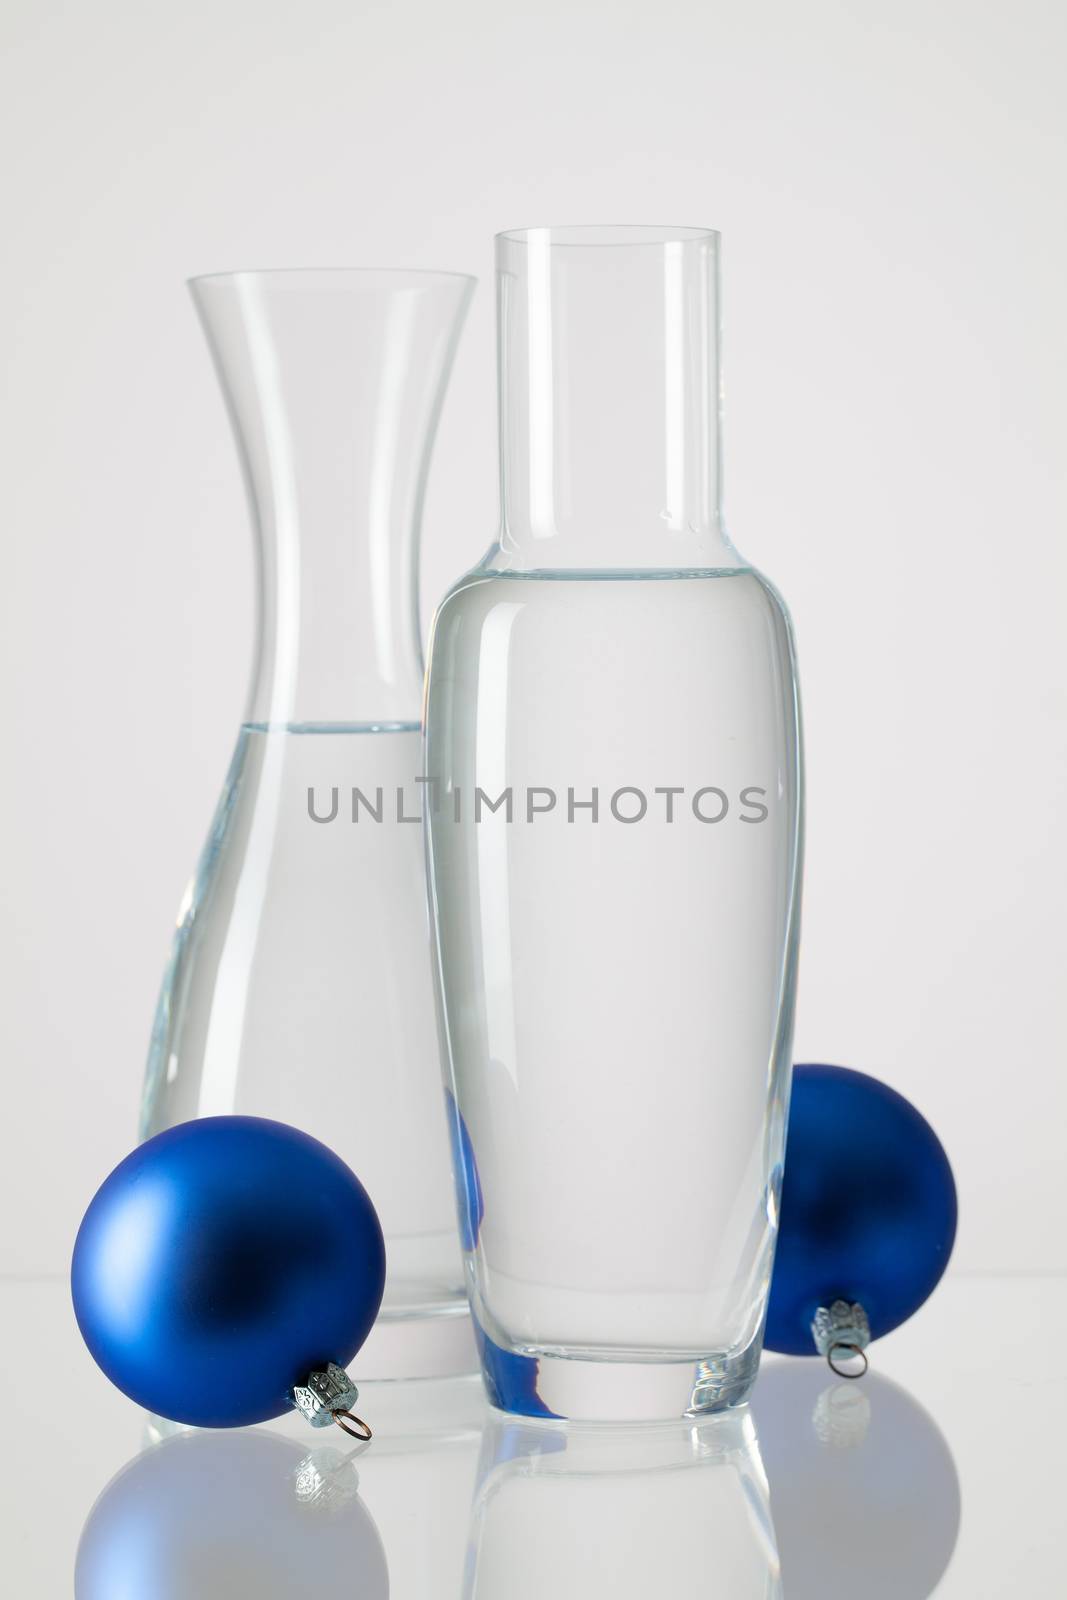 Two vases with clean water and Christmas decoration on a glass table